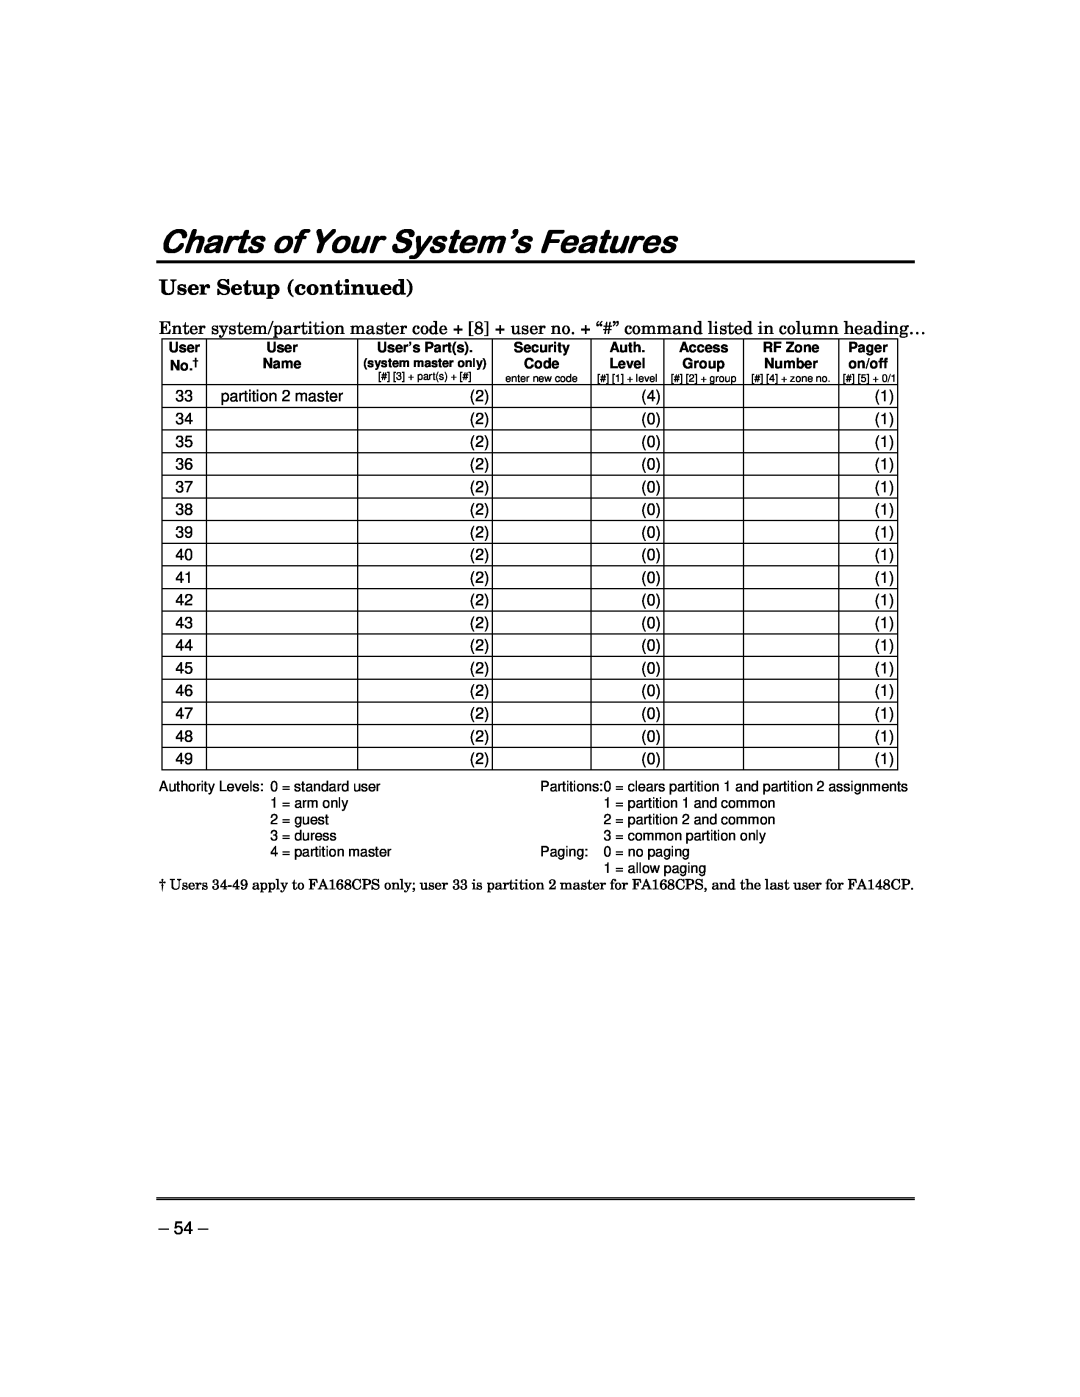 Garmin FA168CPS User Setup continued, Charts of Your System’s Features, User’s Parts, Security, Auth, Access, RF Zone 